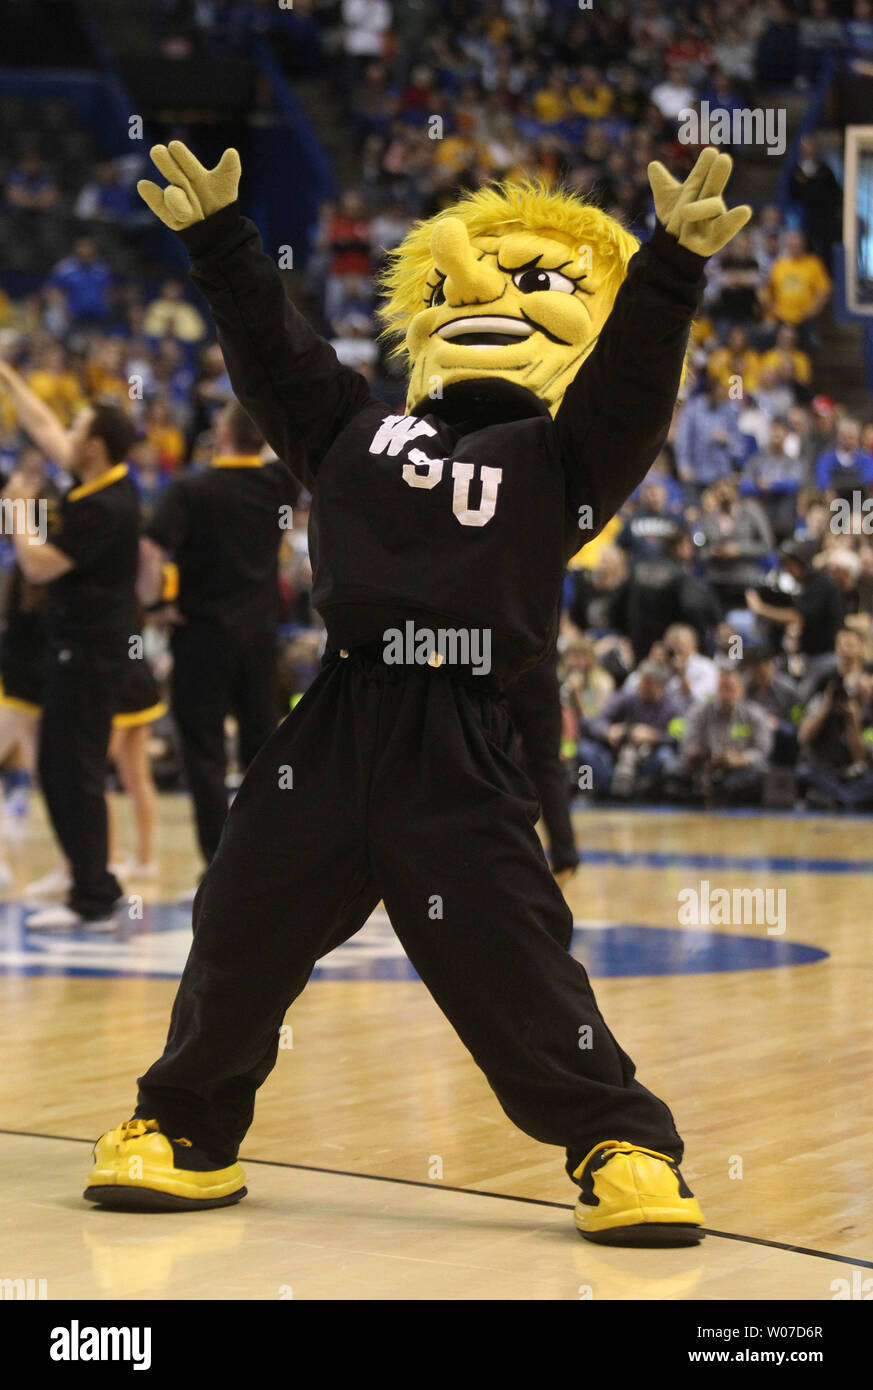 The Wichita State Shockers Mascot Performs With The Cheerleaders During A Time Out Against The 